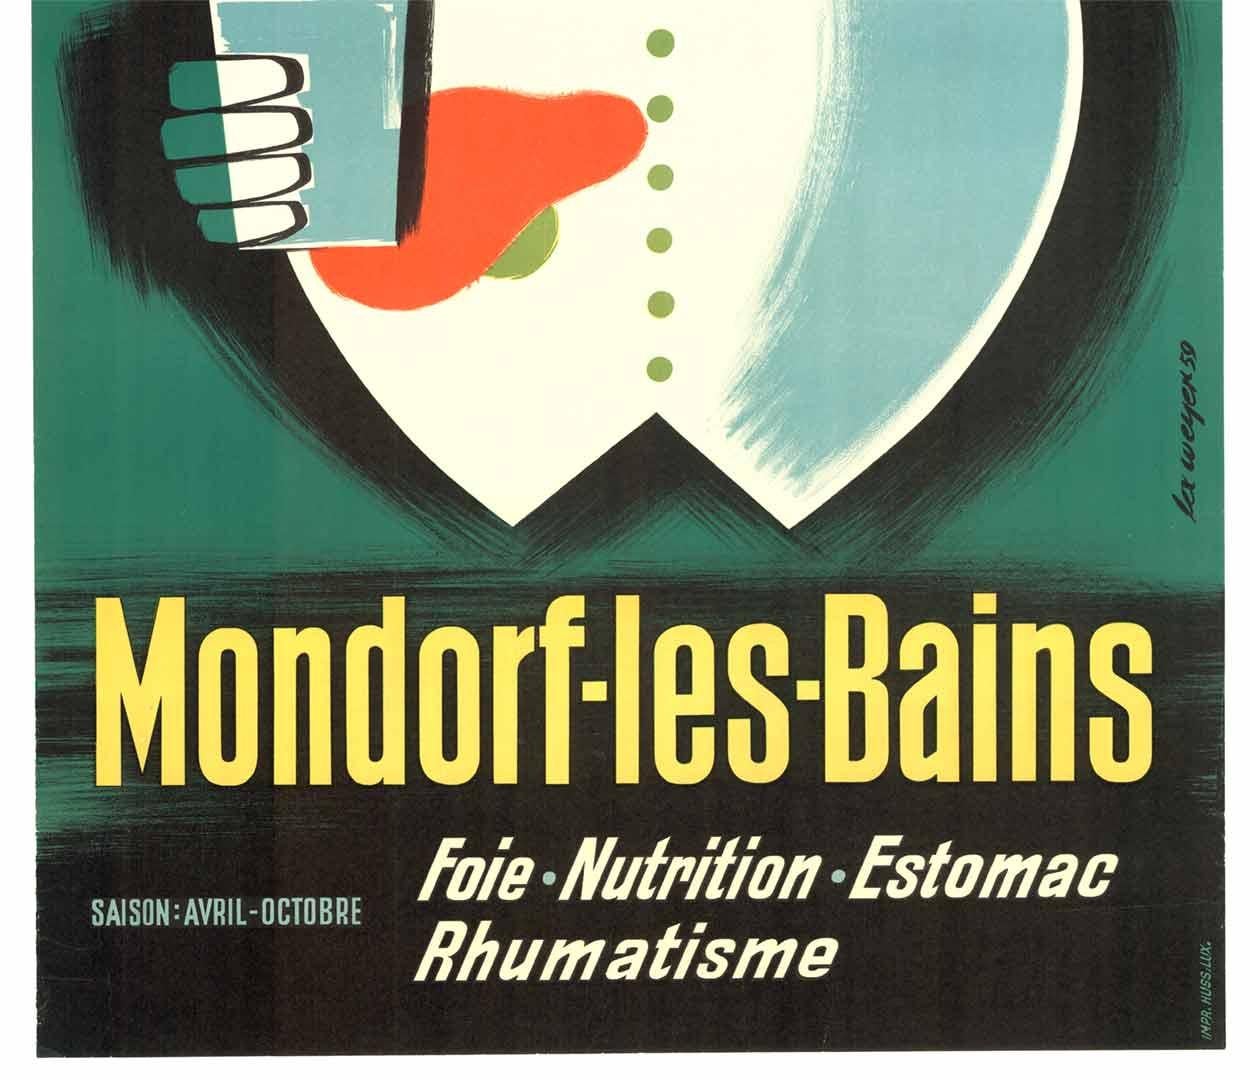 Original Mondorf-les-Baines vintage spa poster - Abstract Expressionist Print by Lex Weyer